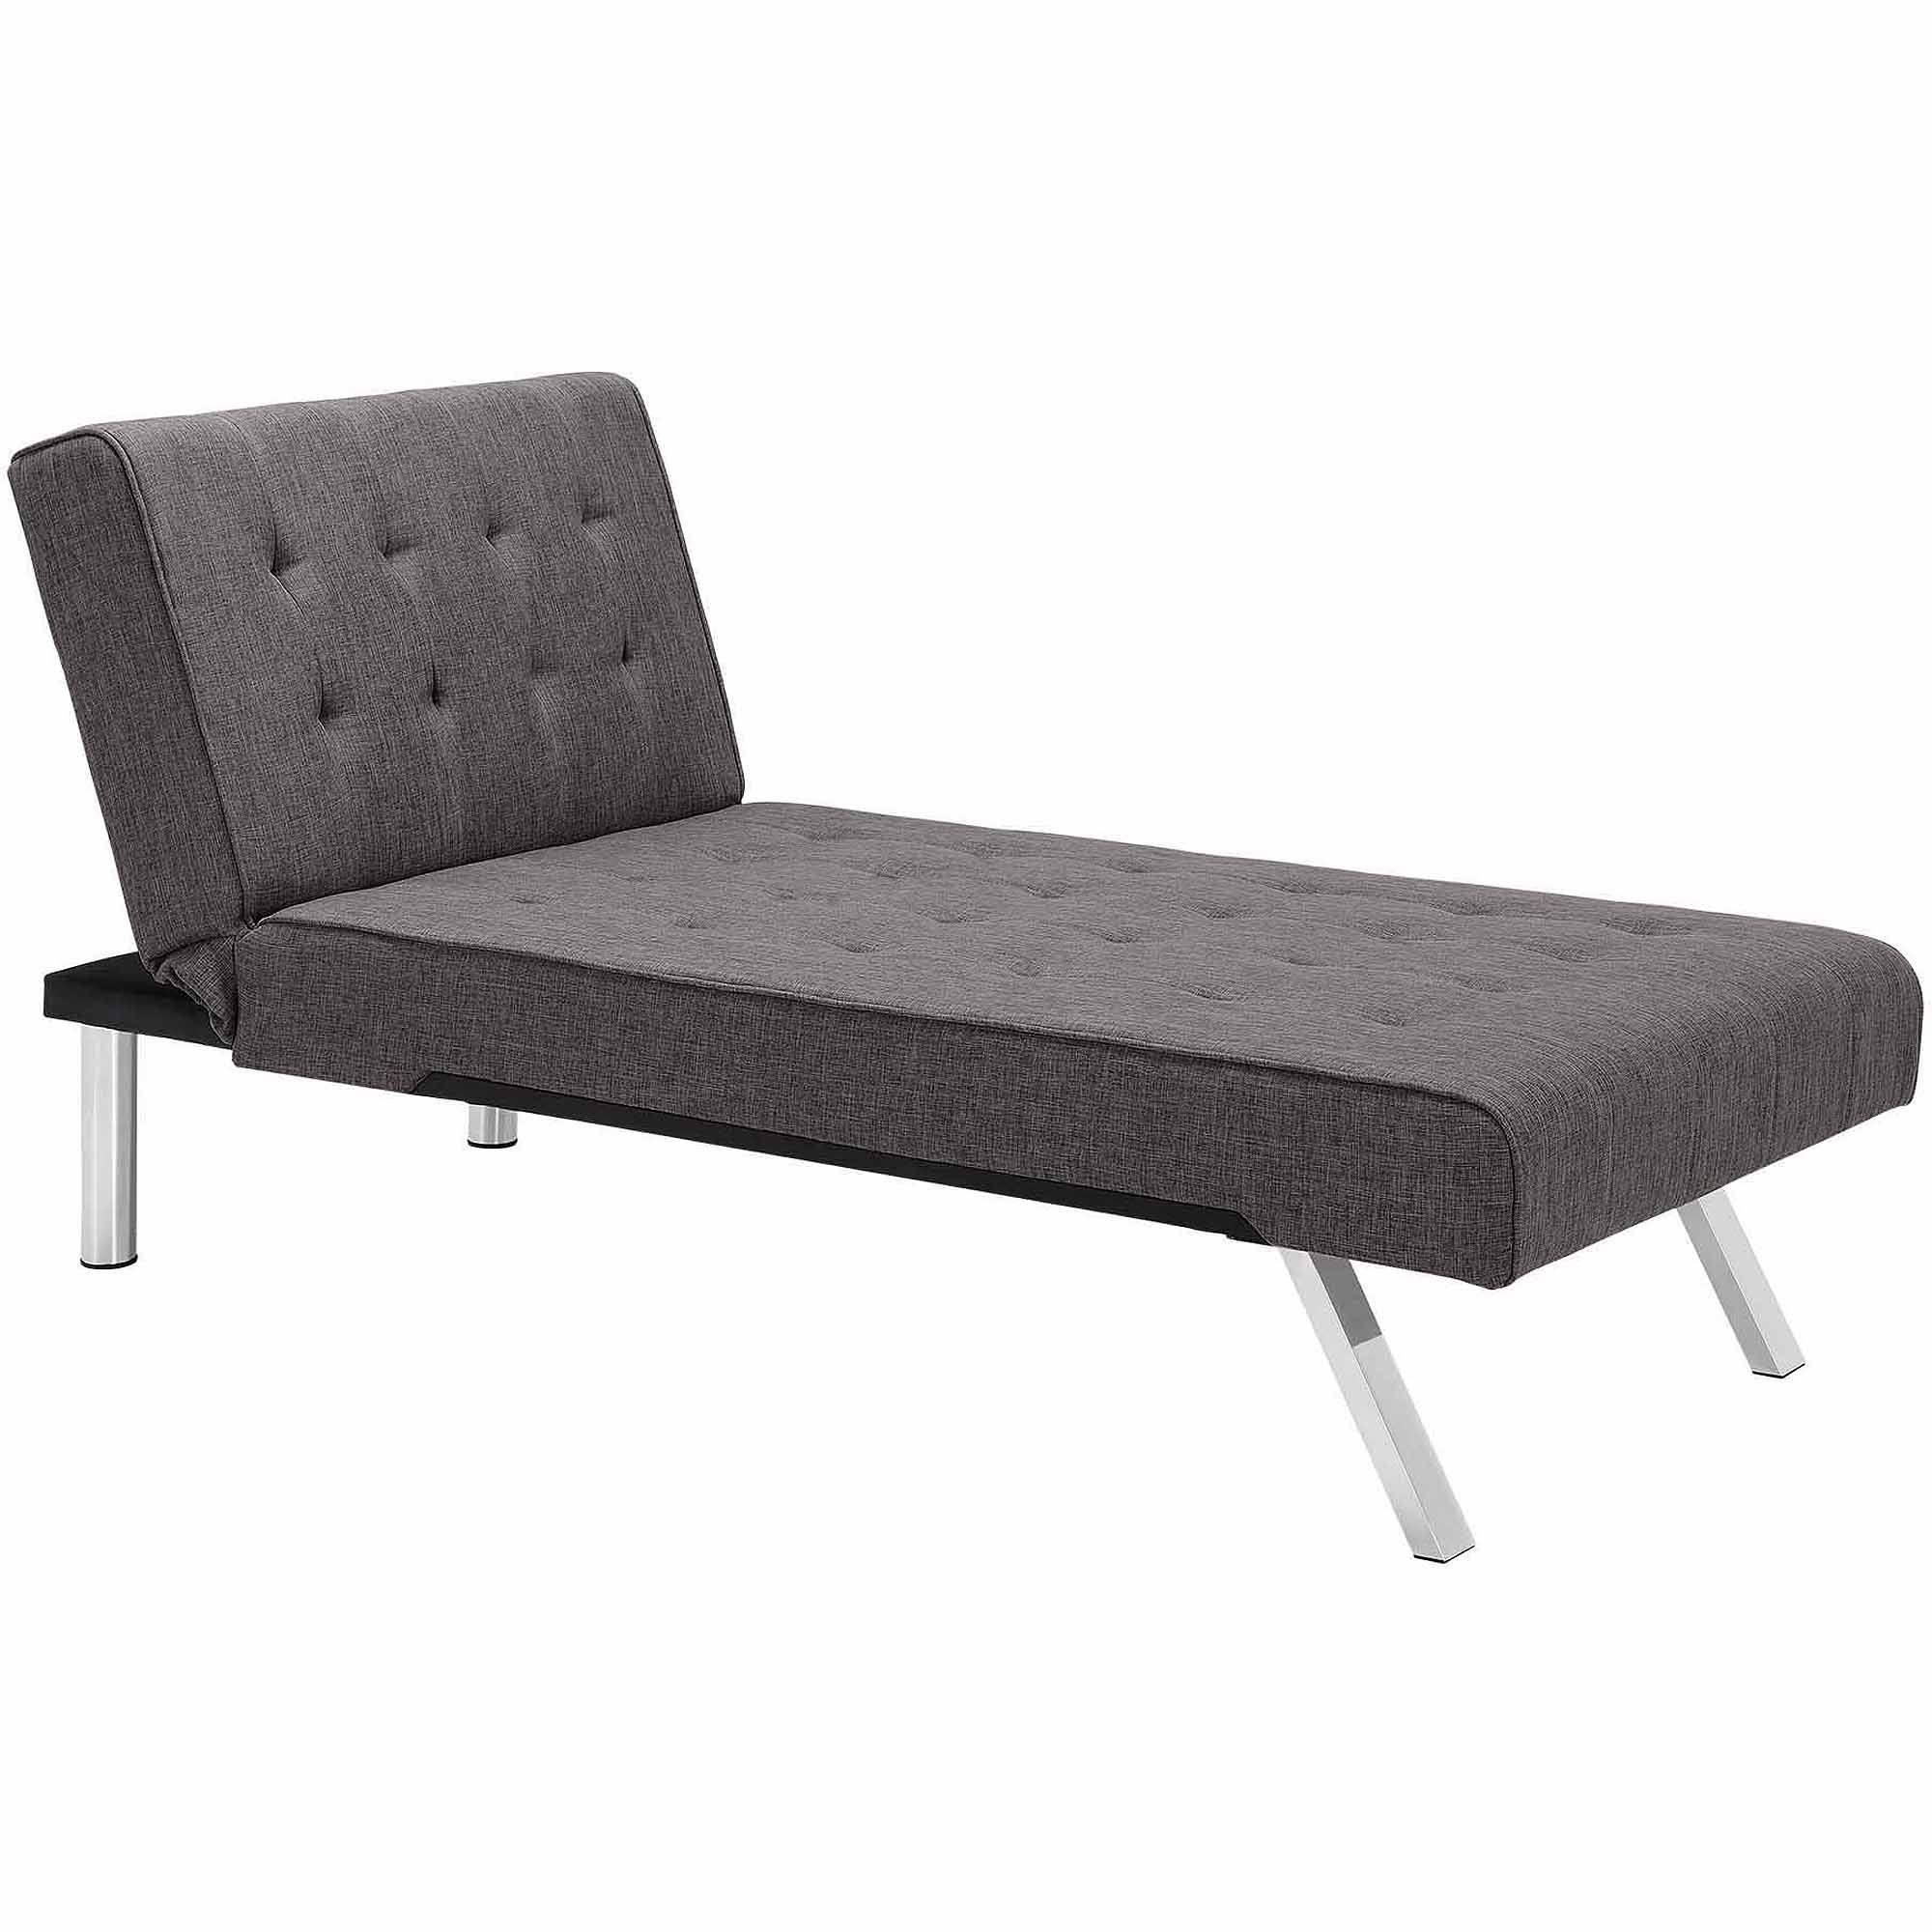 Well Known Walmart Chaise Lounges Inside Dhp Emily Futon Chaise Lounger, Multiple Colors – Walmart (View 5 of 15)